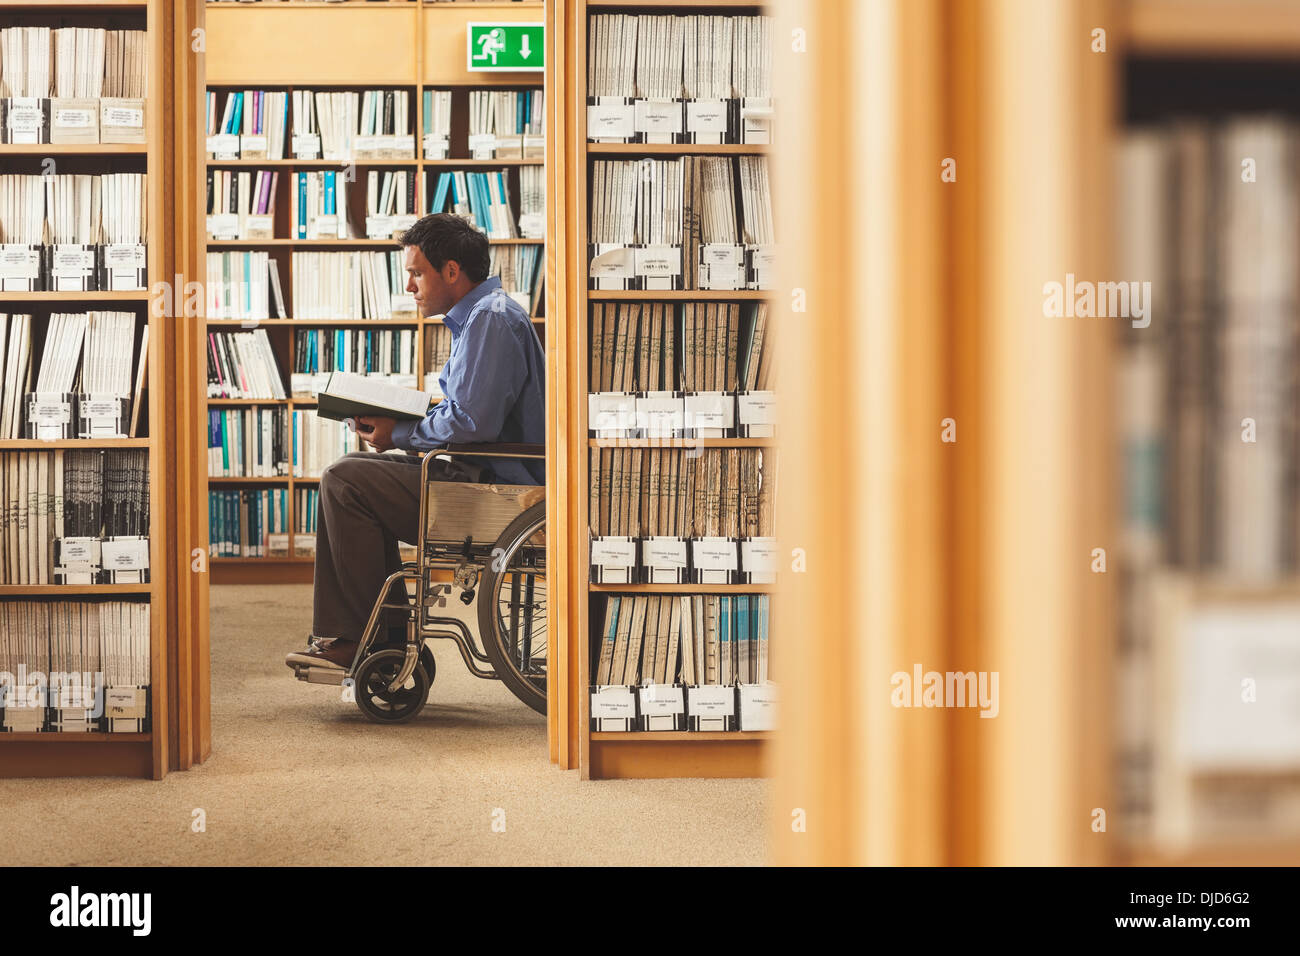 Man sitting in wheelchair looking at a book Stock Photo